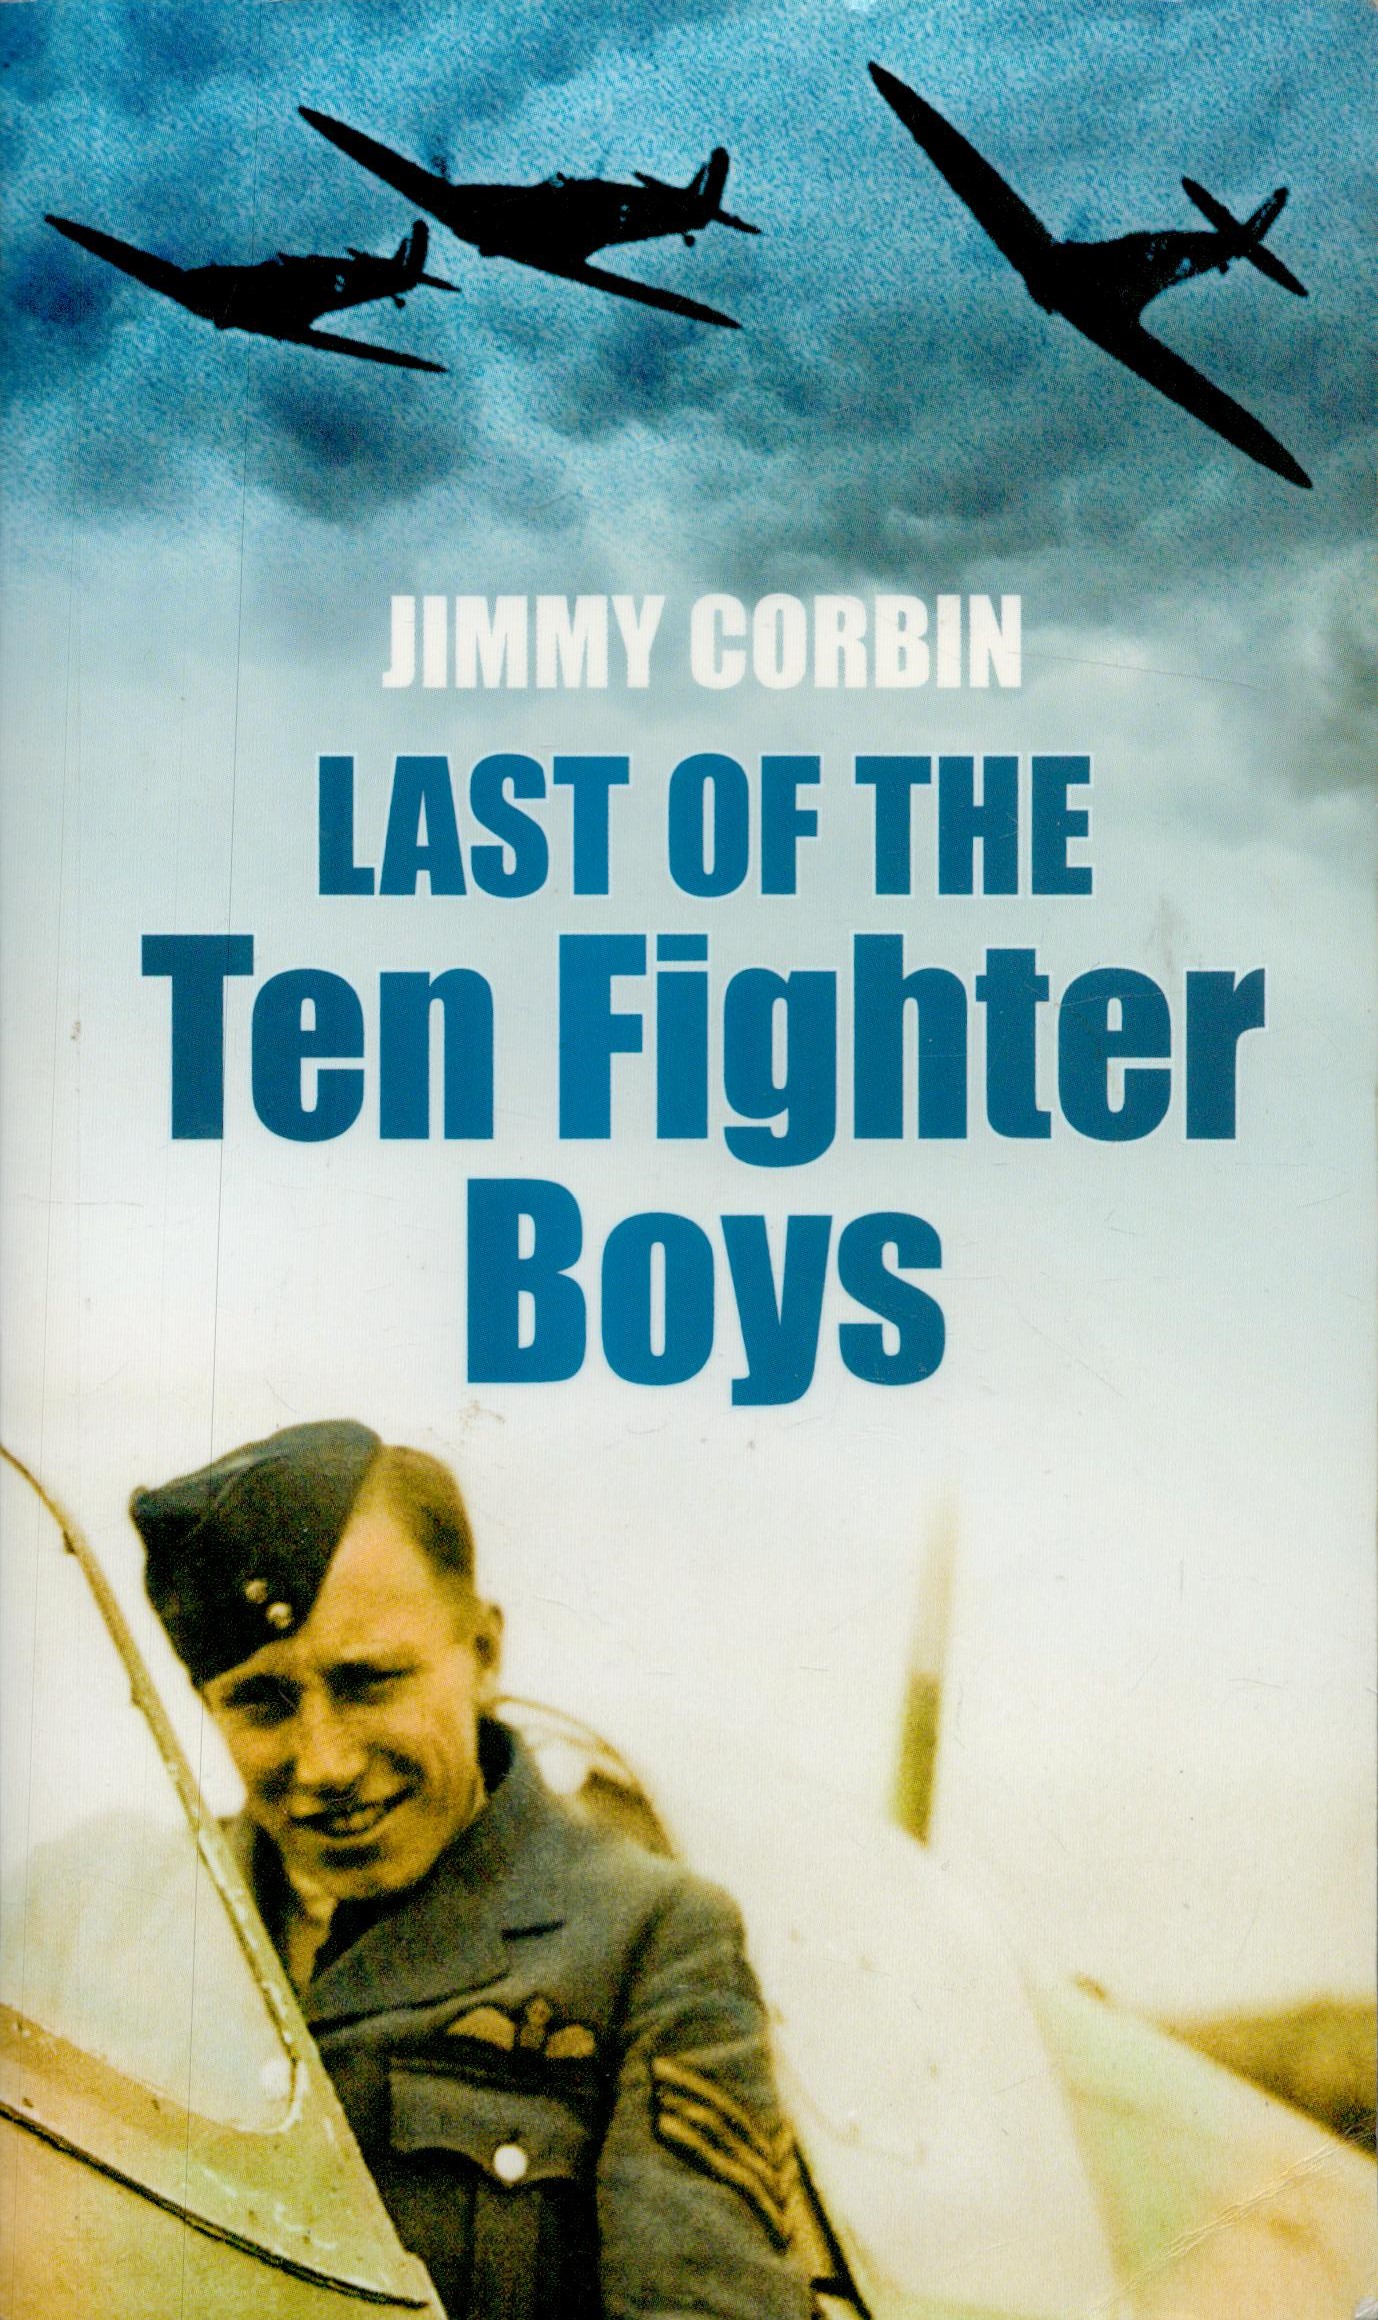 WWII Last of the Ten fighter boys paperback book by the author Jimmy Corbin. Good Condition. All